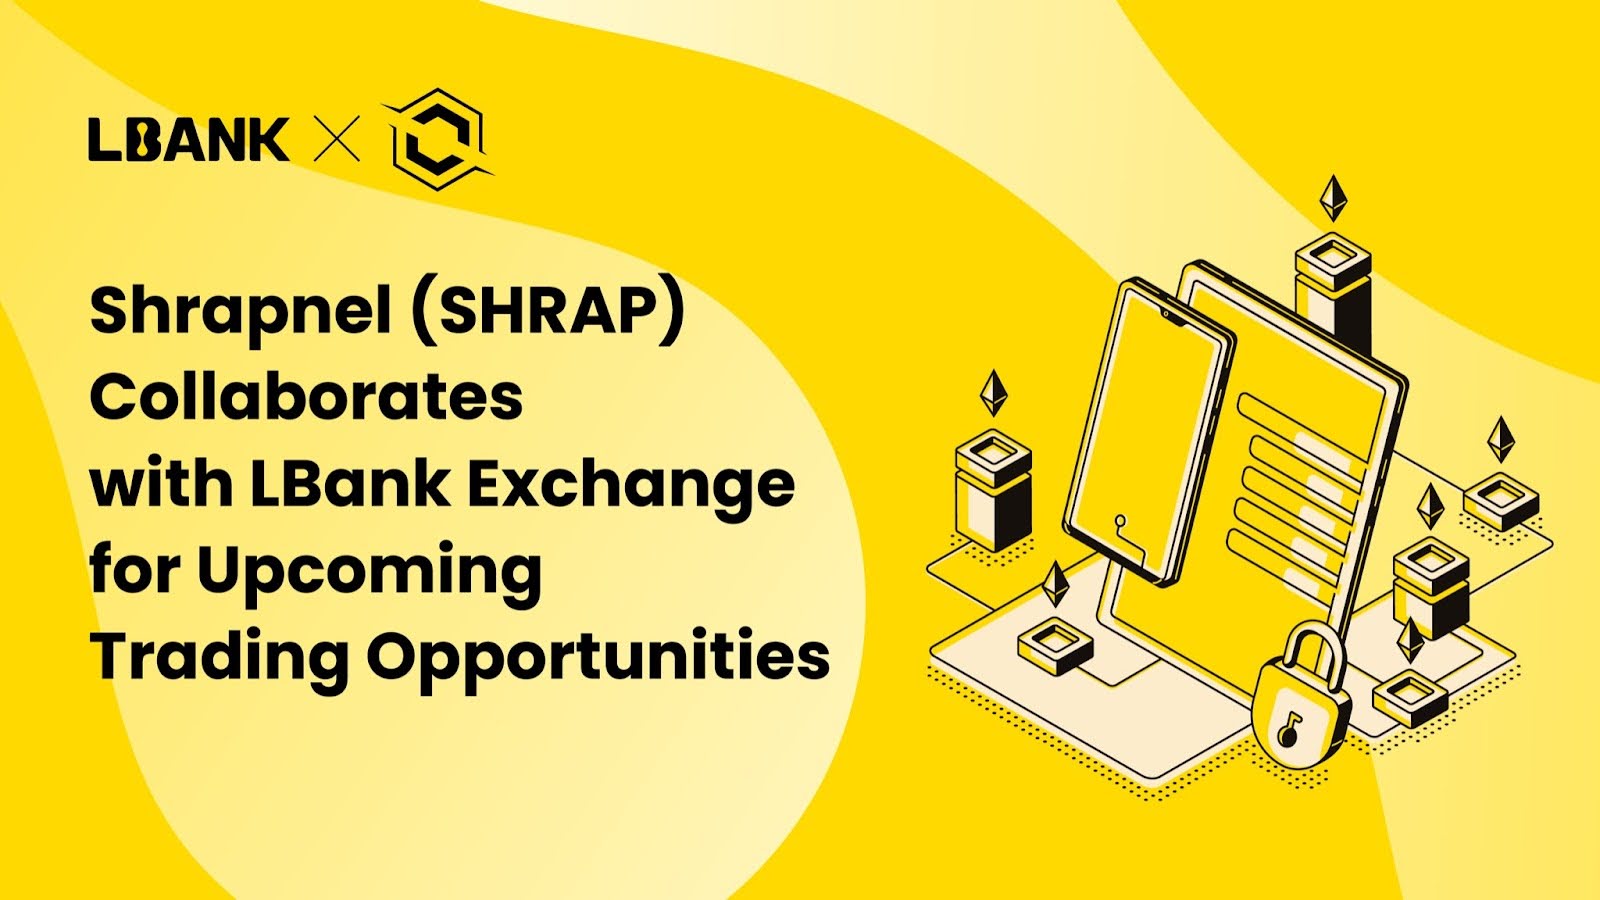 Shrapnel (SHRAP) Collaborates with LBank Exchange for Upcoming Trading Opportunities